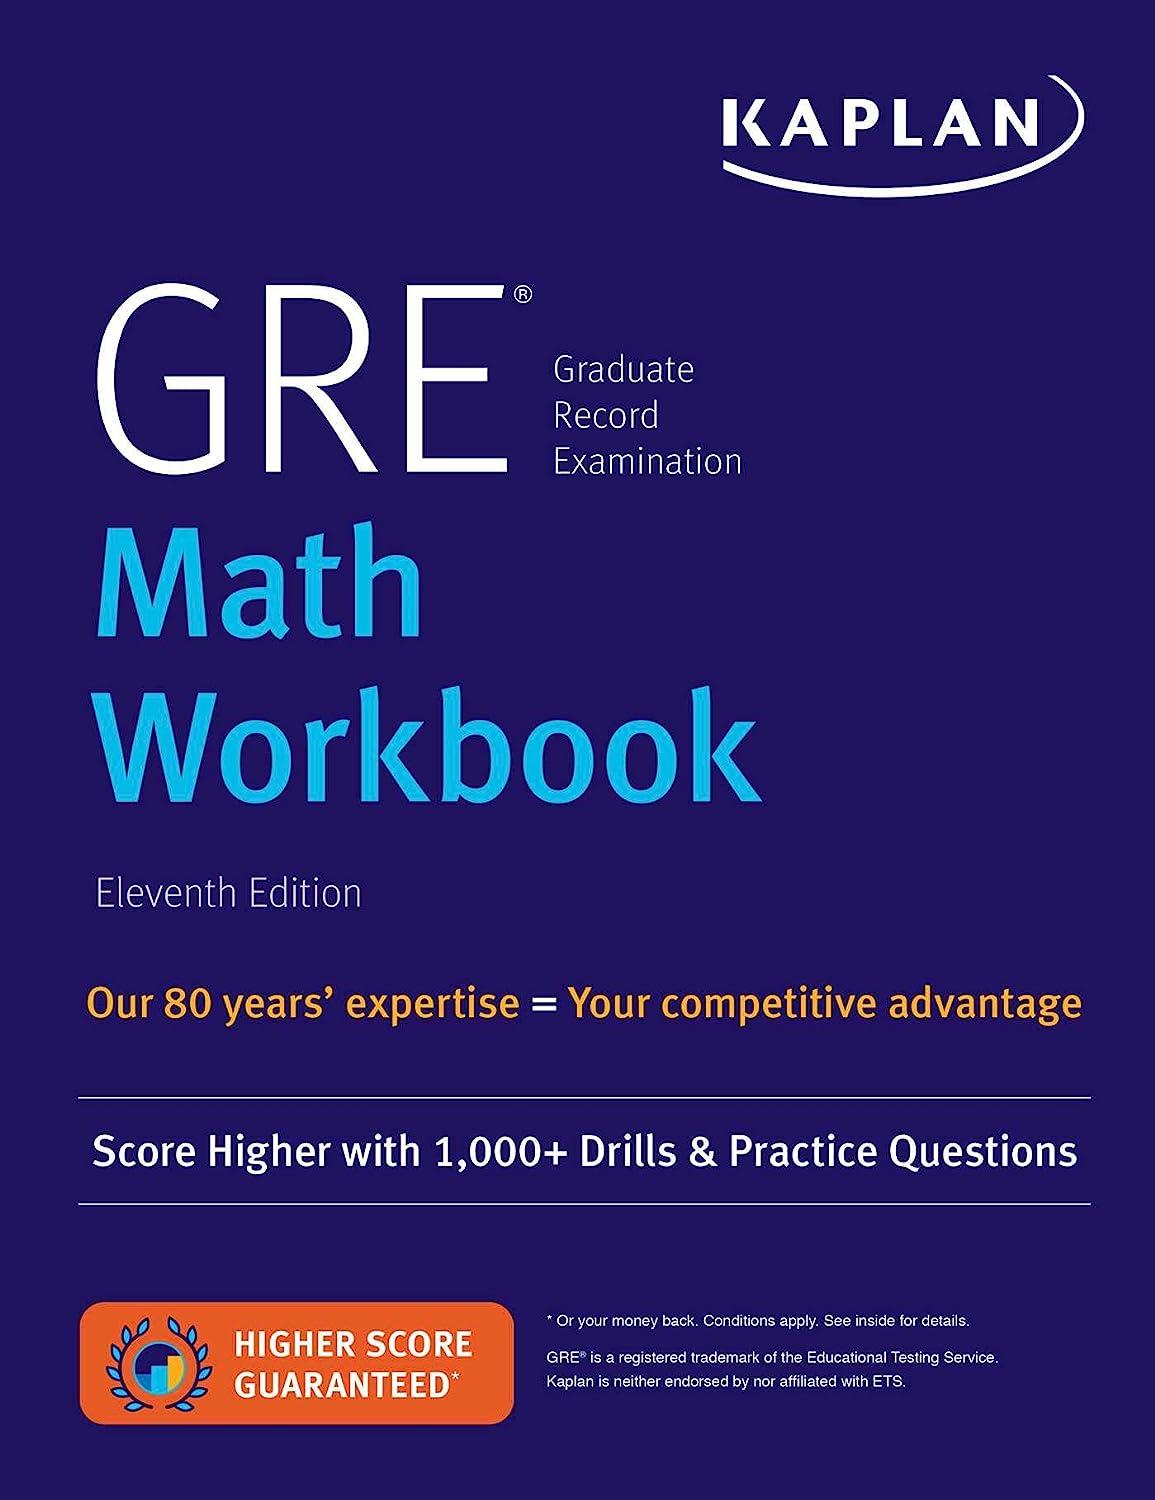 gre math workbook score higher with 1000+ drills and practice questions 11th edition kaplan test prep